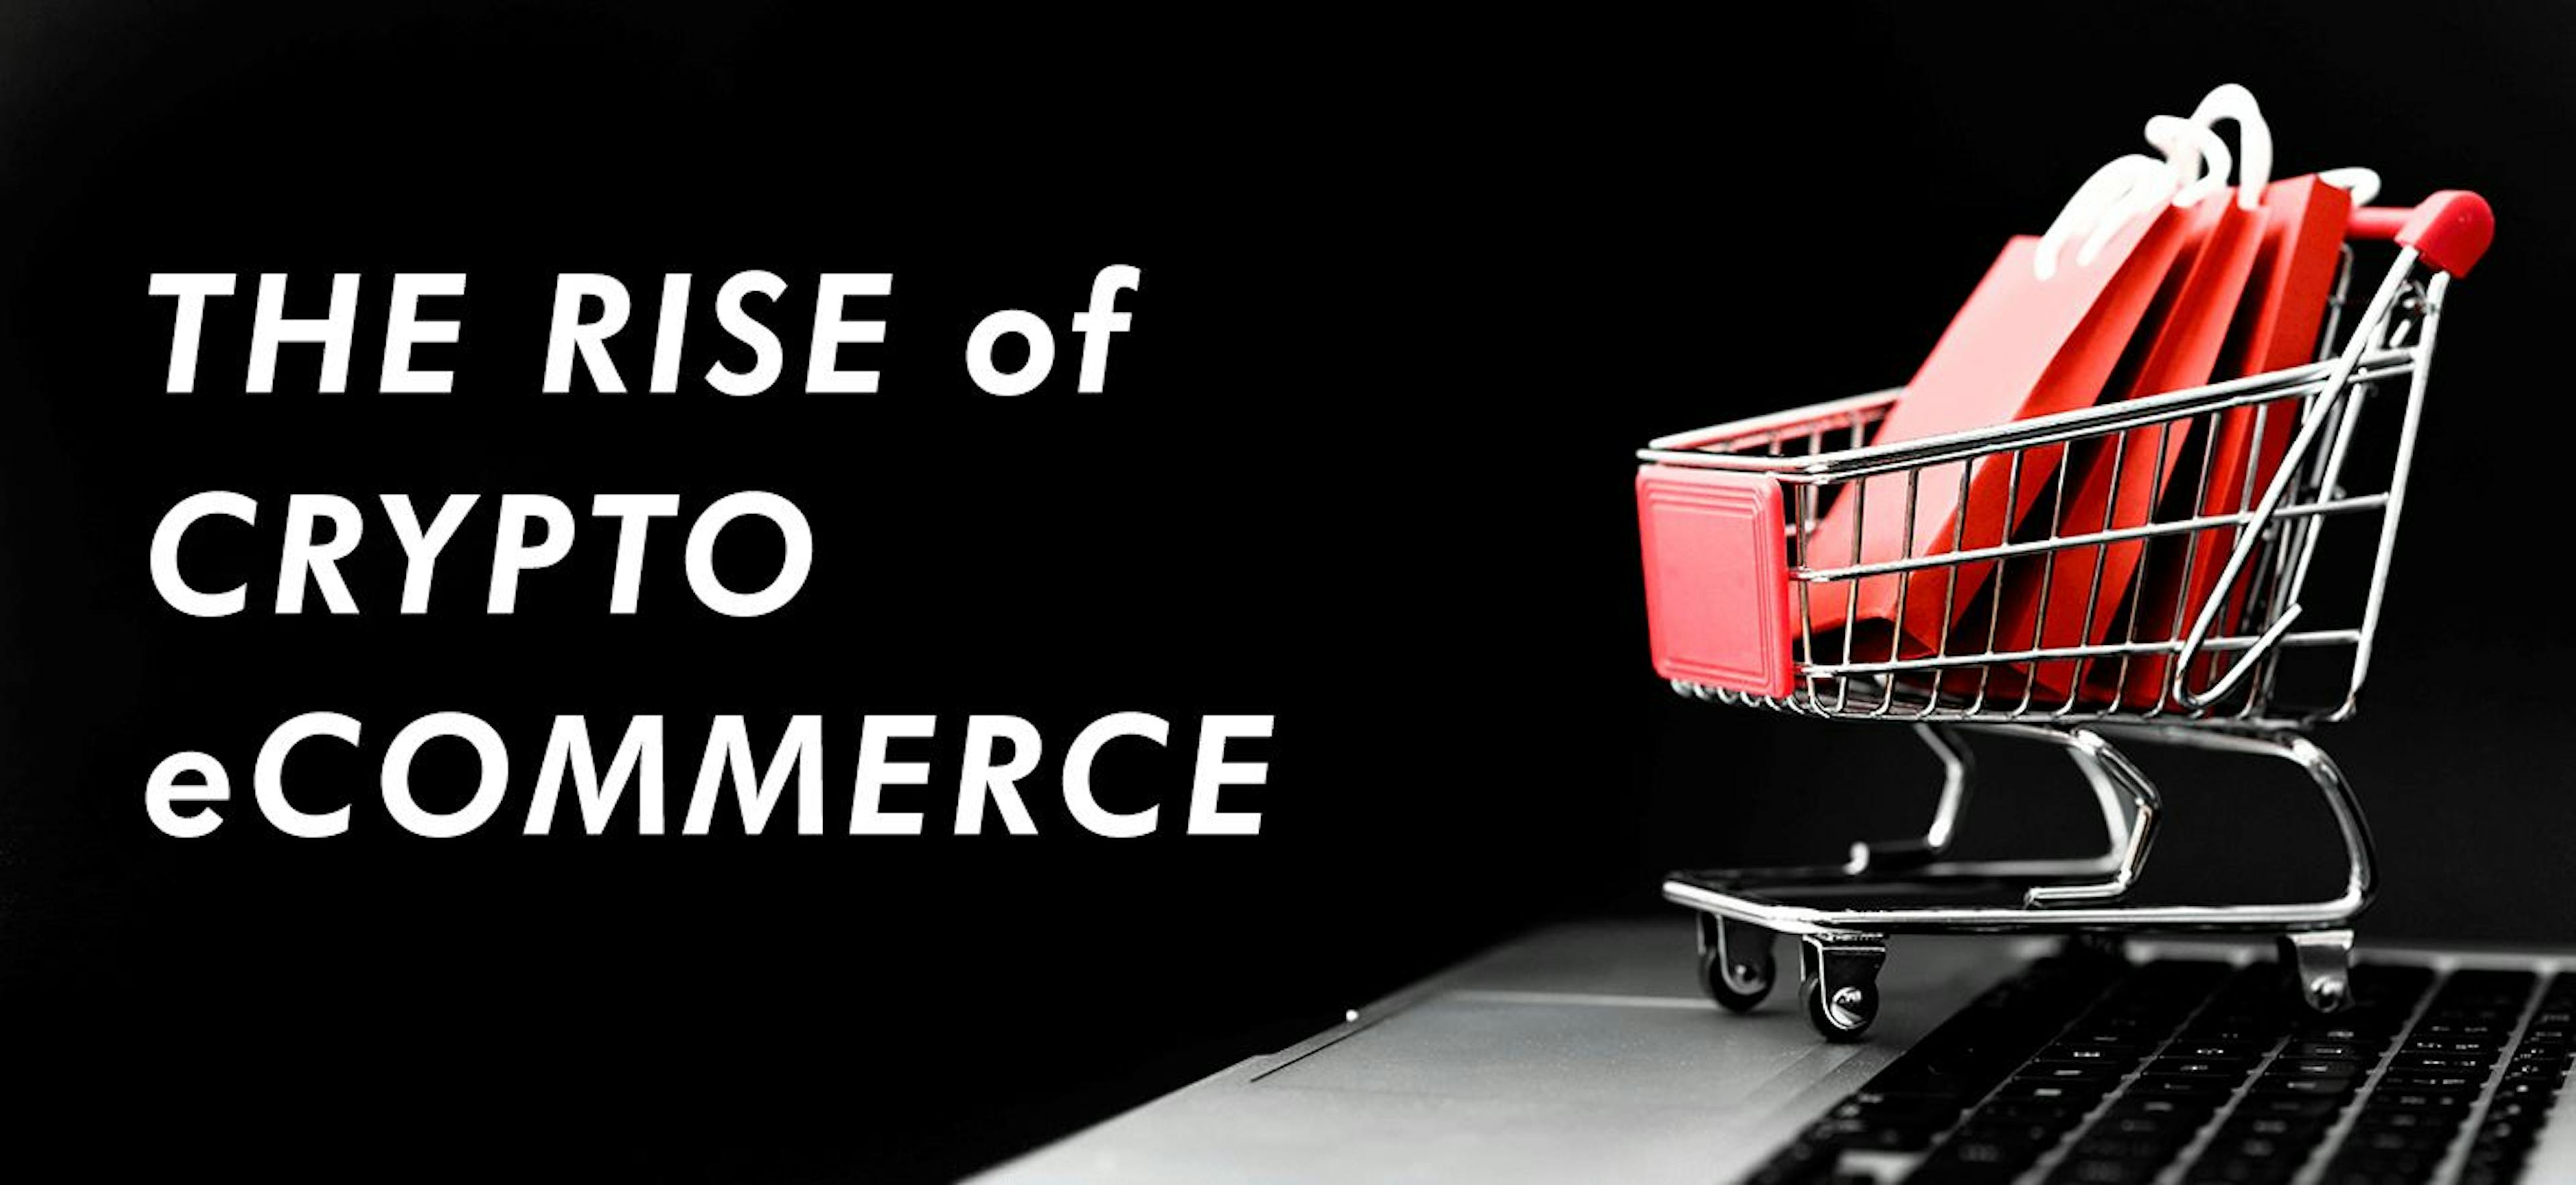 /crypto-ecommerce-is-on-the-rise feature image